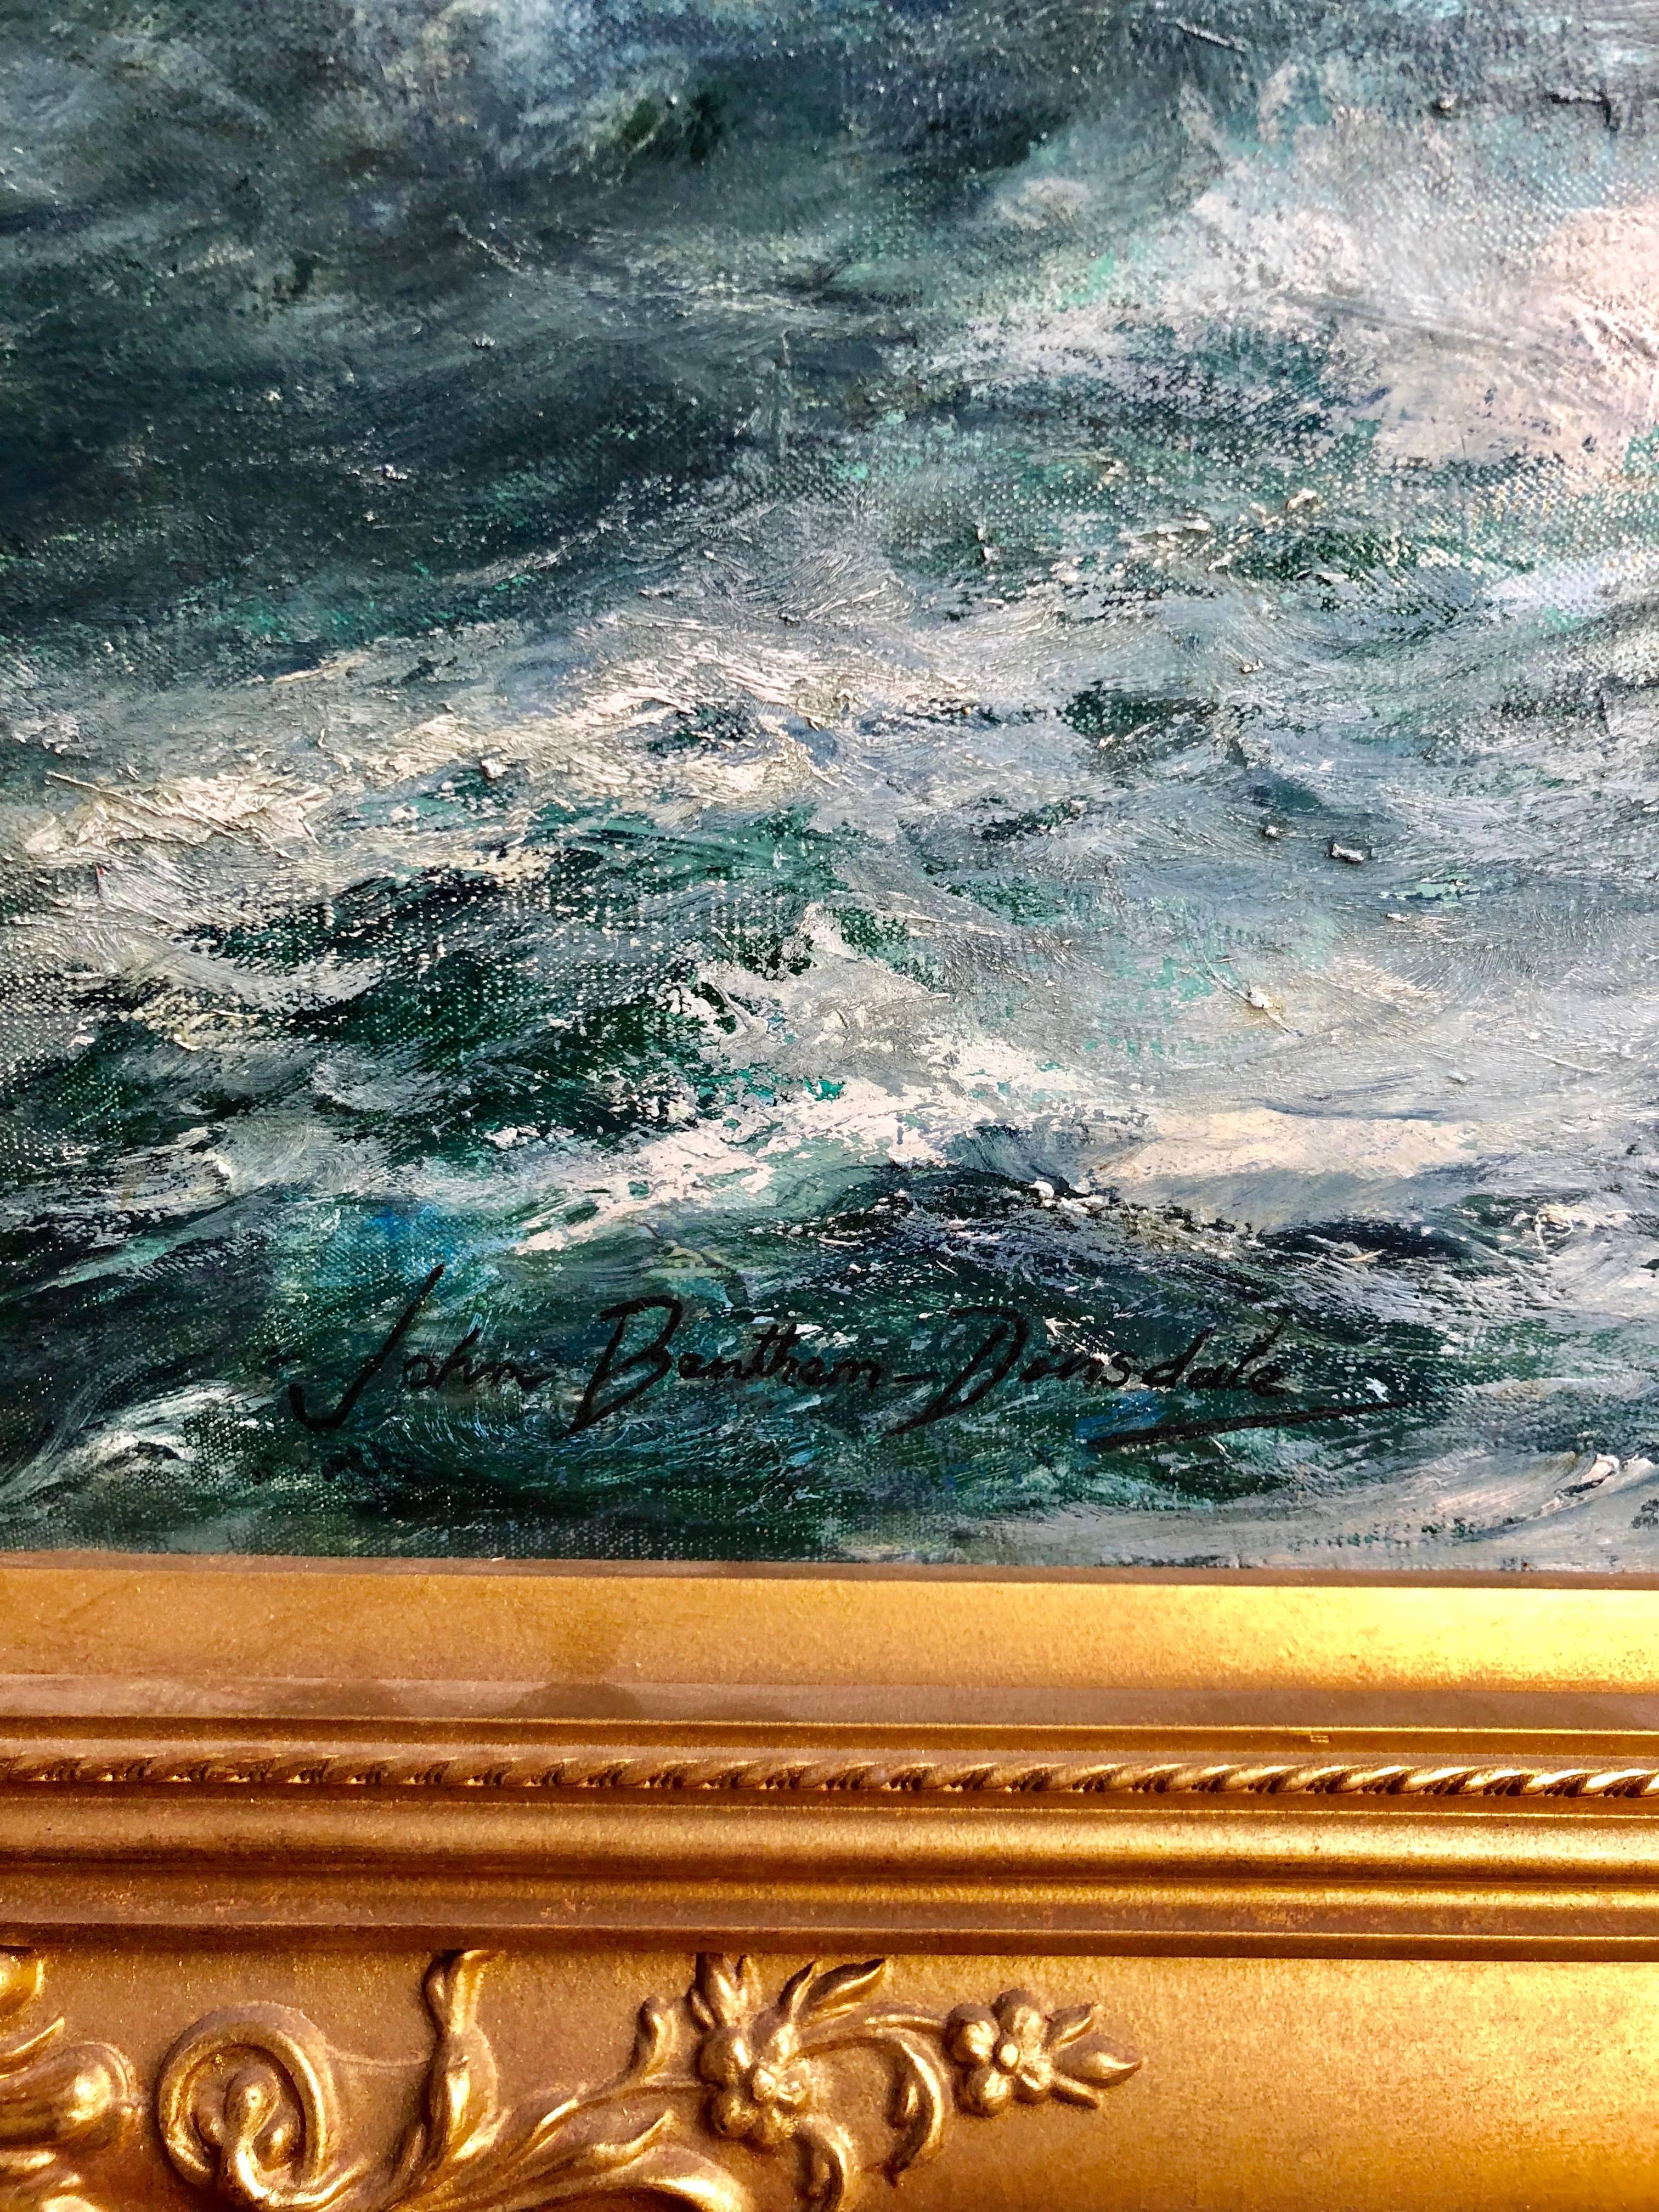 Signed lower left. Oil on canvas.
(Born in Yorkshire, England in 1927; died in 2008). Dinsdale painted the sea and great ships of the era when “Britannia ruled the waves” with her fleets of clipper and fighting ships whose huge white sails took men